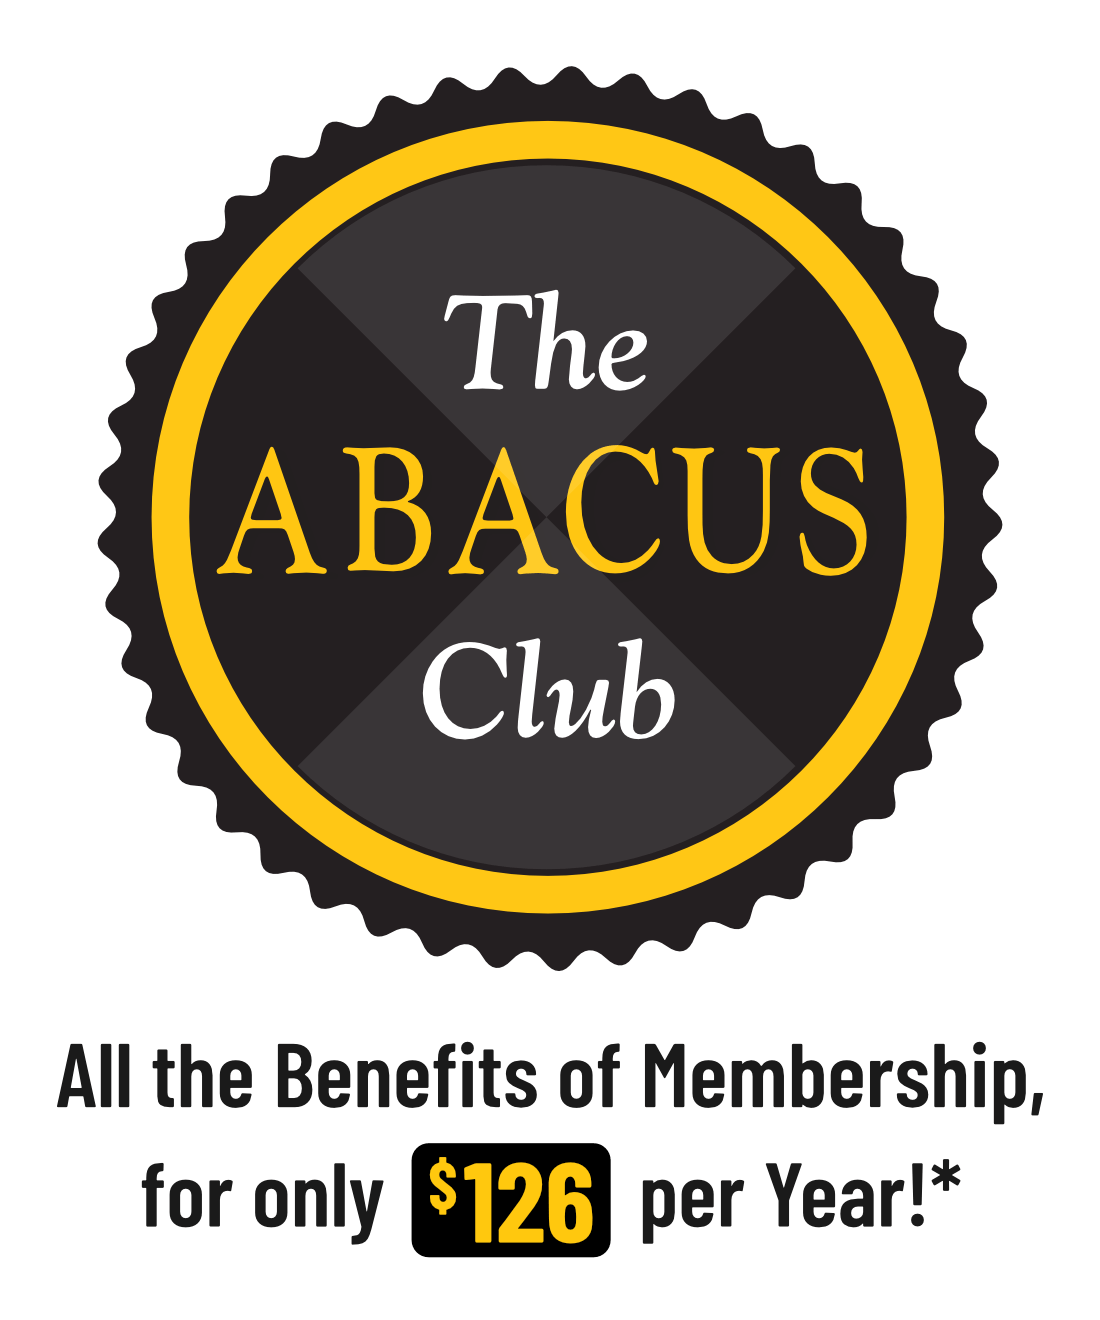 <span class="bundle-title">The ABACUS Club</span><span class="bundle-price">$126.00 / $113.00<br /><em>(Regular Price / Combo Price)</em></span><span class="bundle-description">Annual multi-point residential plumbing inspection. Per year, per home.</span><span class="bundle-btn hidden-xs">Click to Add »</span><span class="bundle-btn visible-xs">Tap to Add »</span>